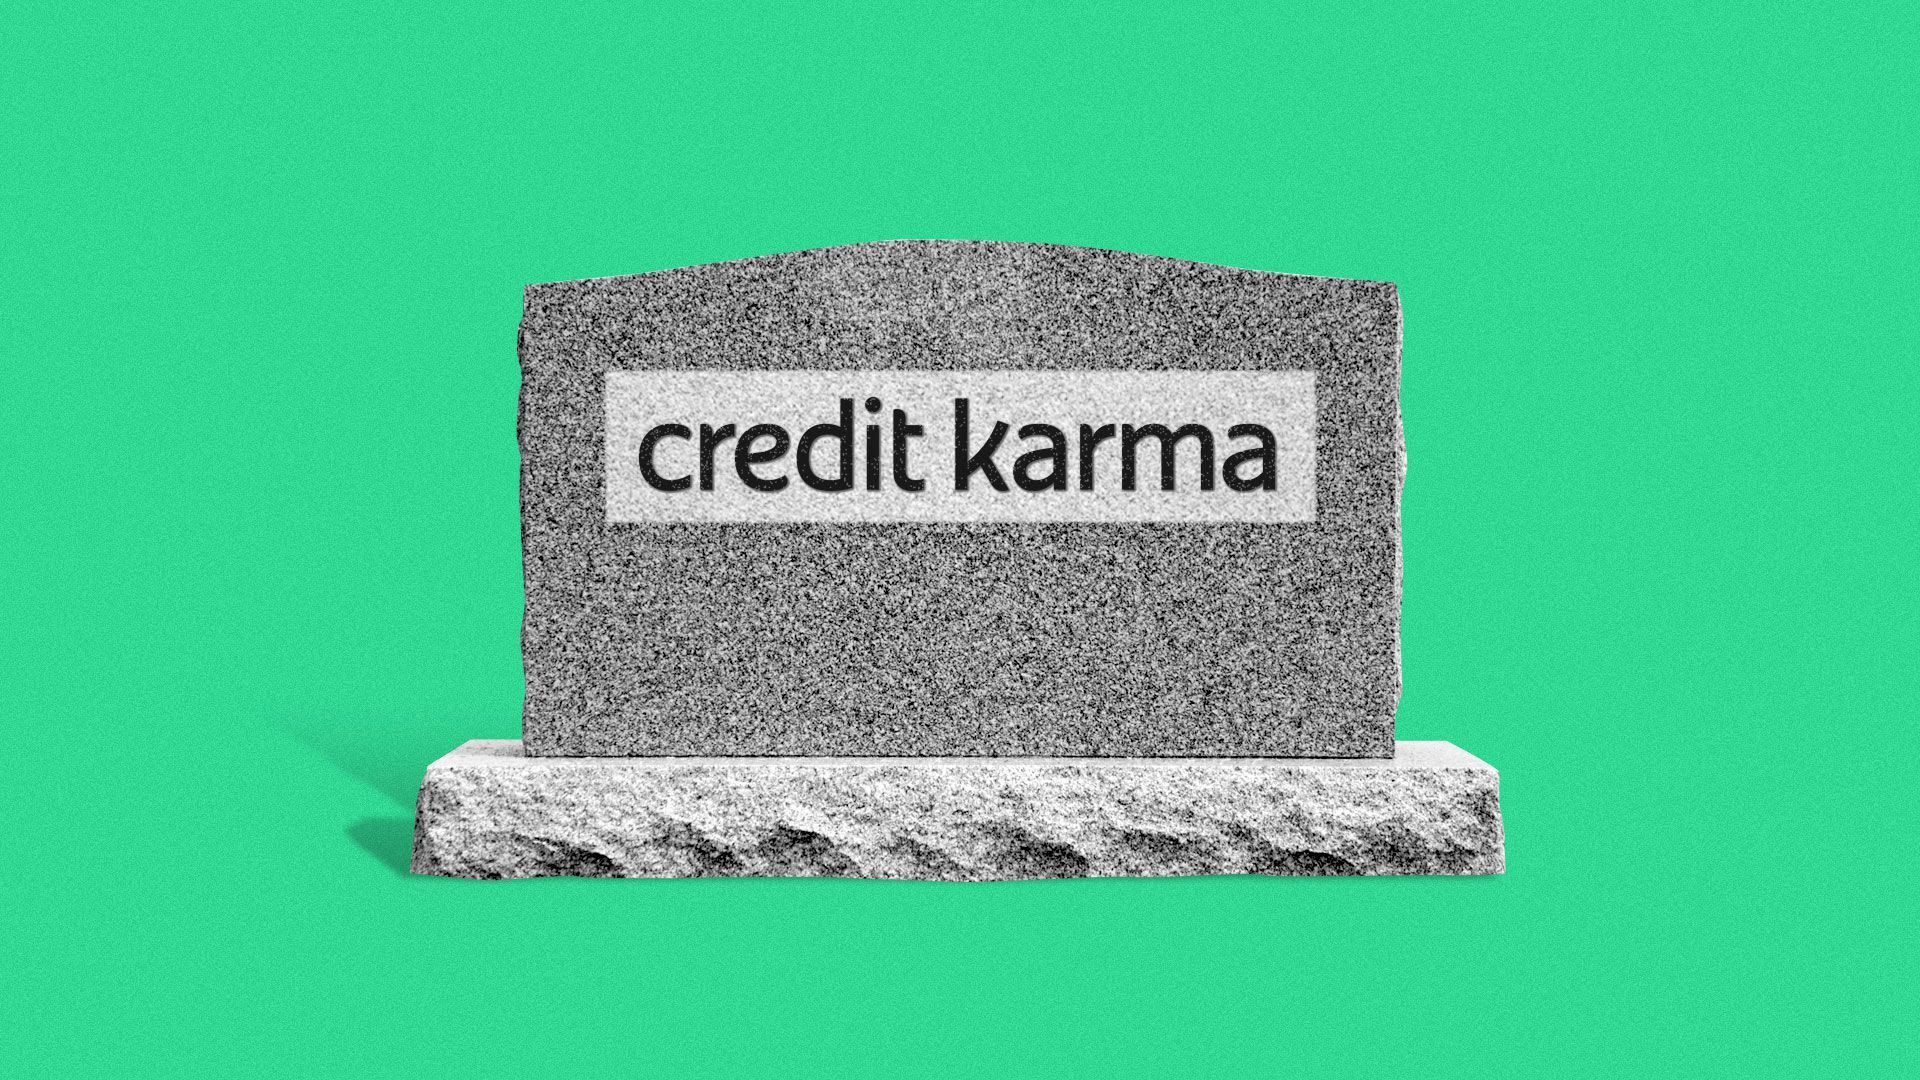 Credit Karma written on a grave stone.